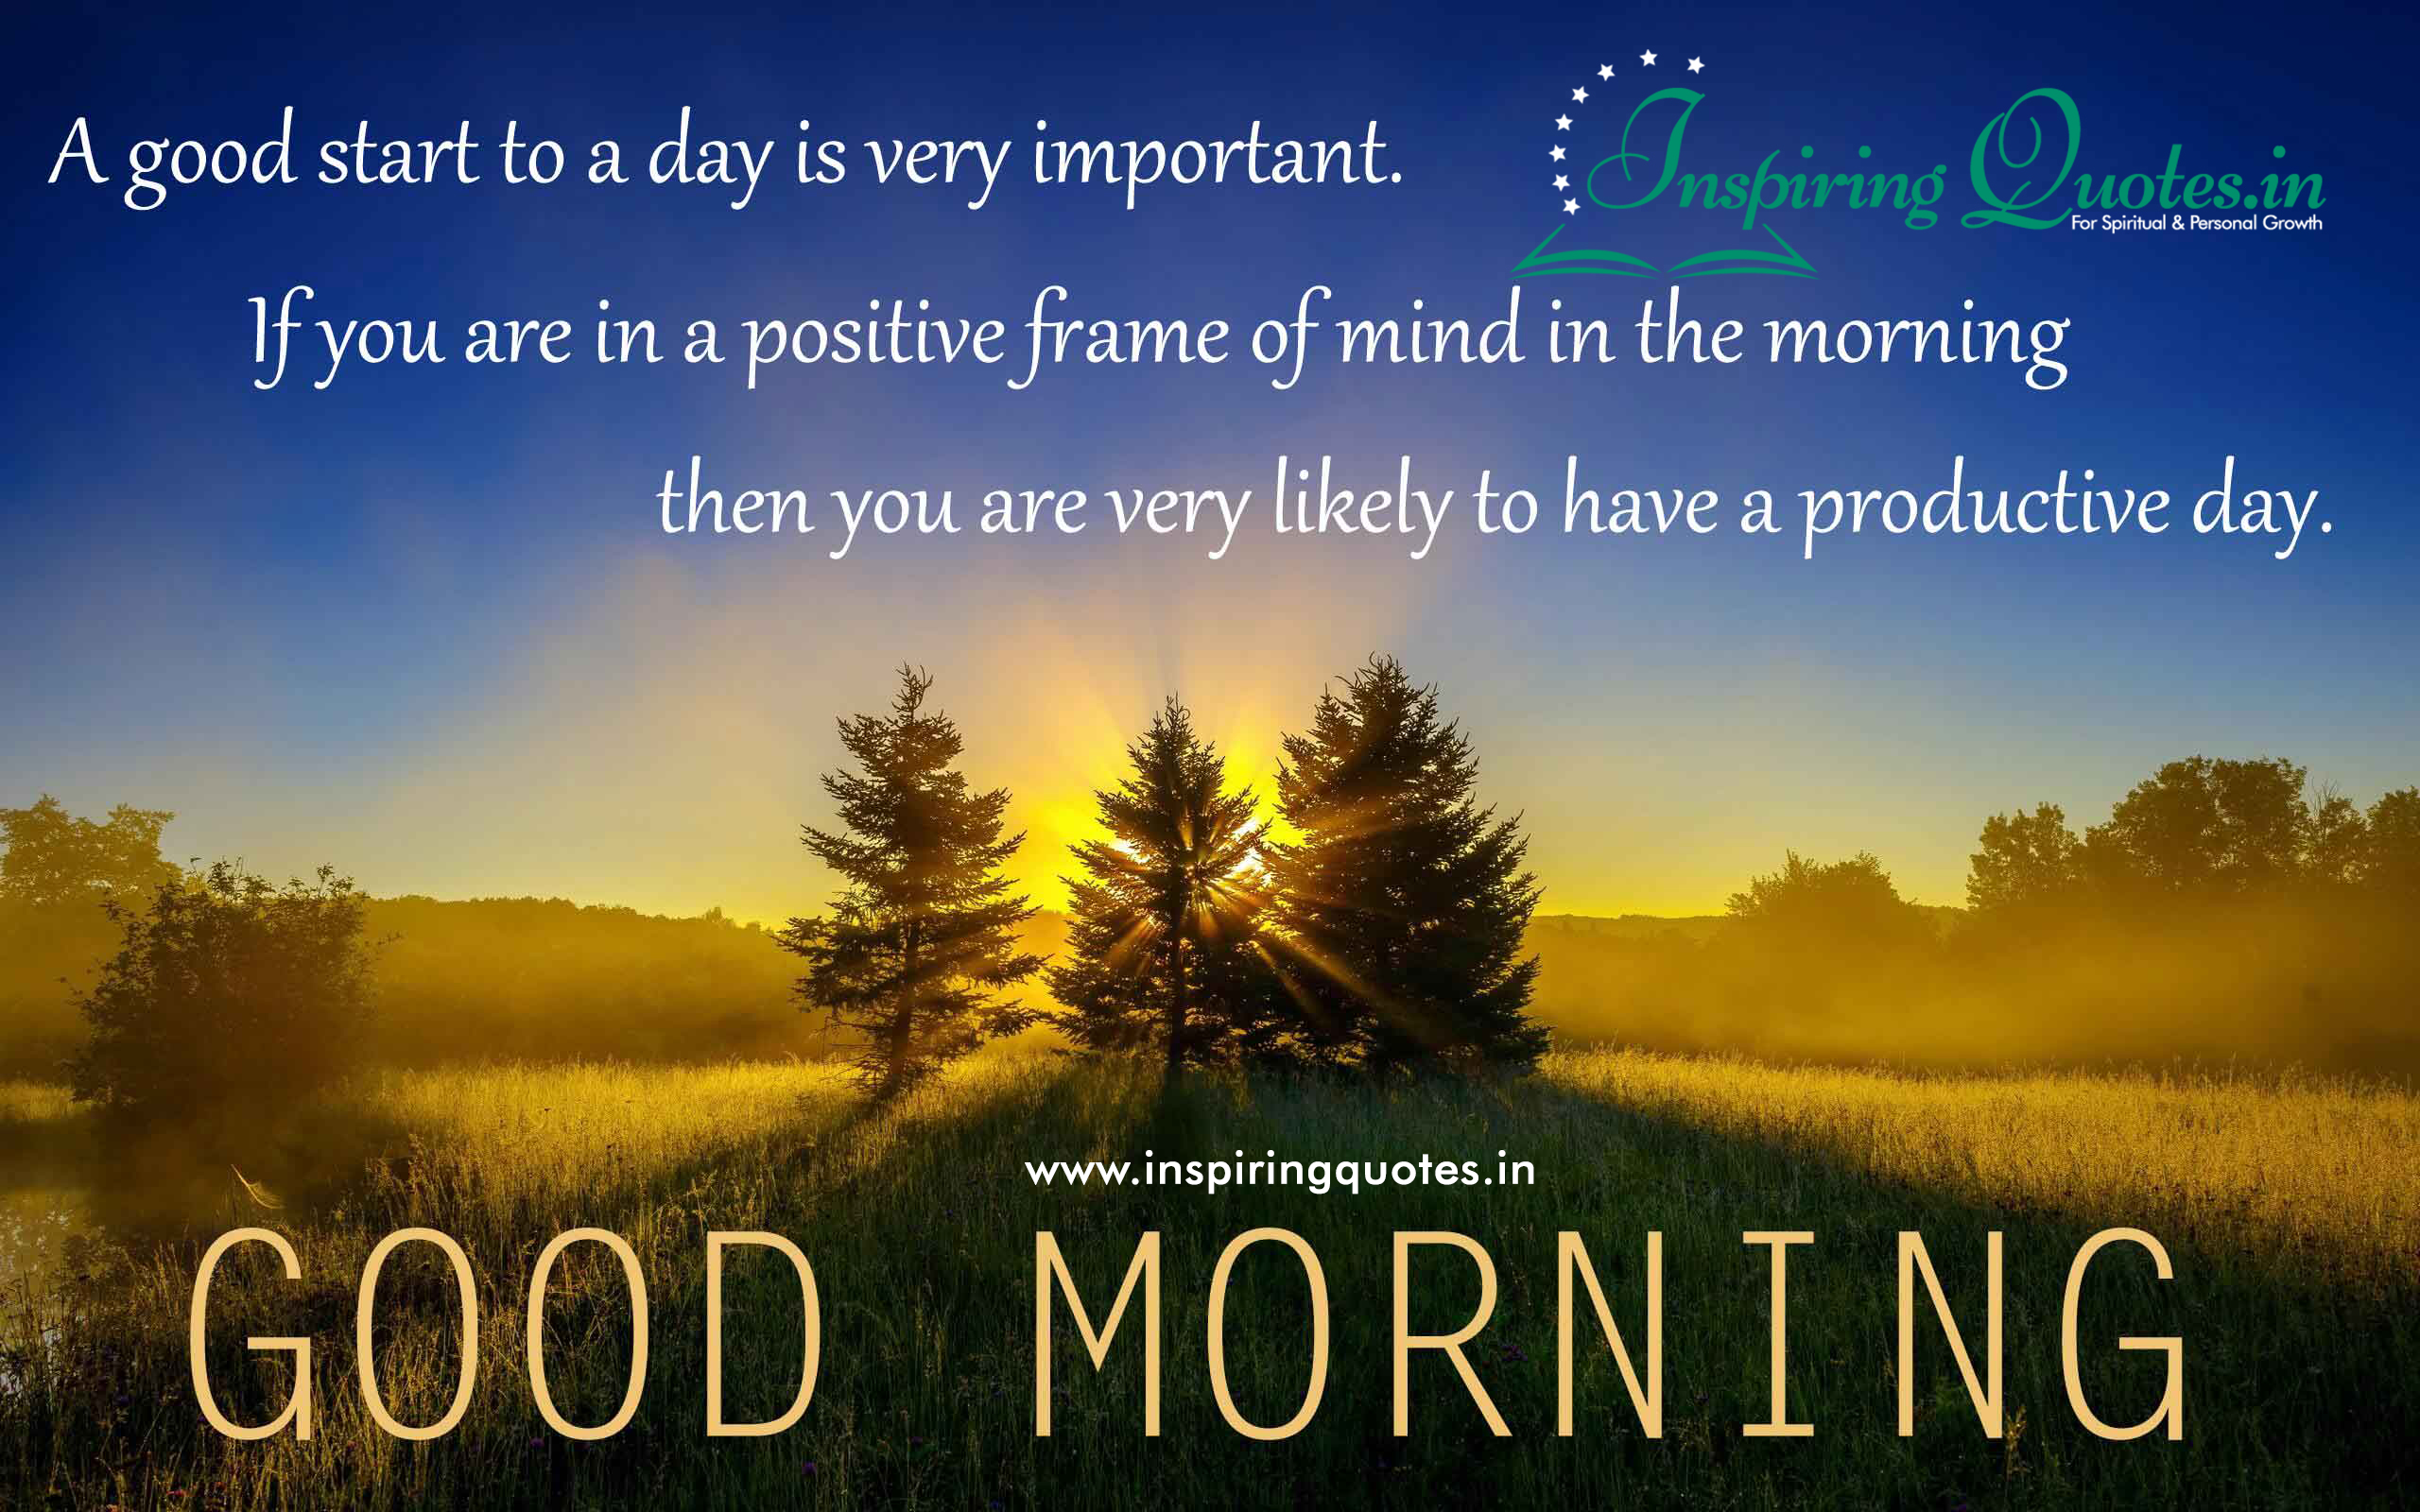 Good Morning Lines For Good Start to a Day - Inspiring Quotes ...